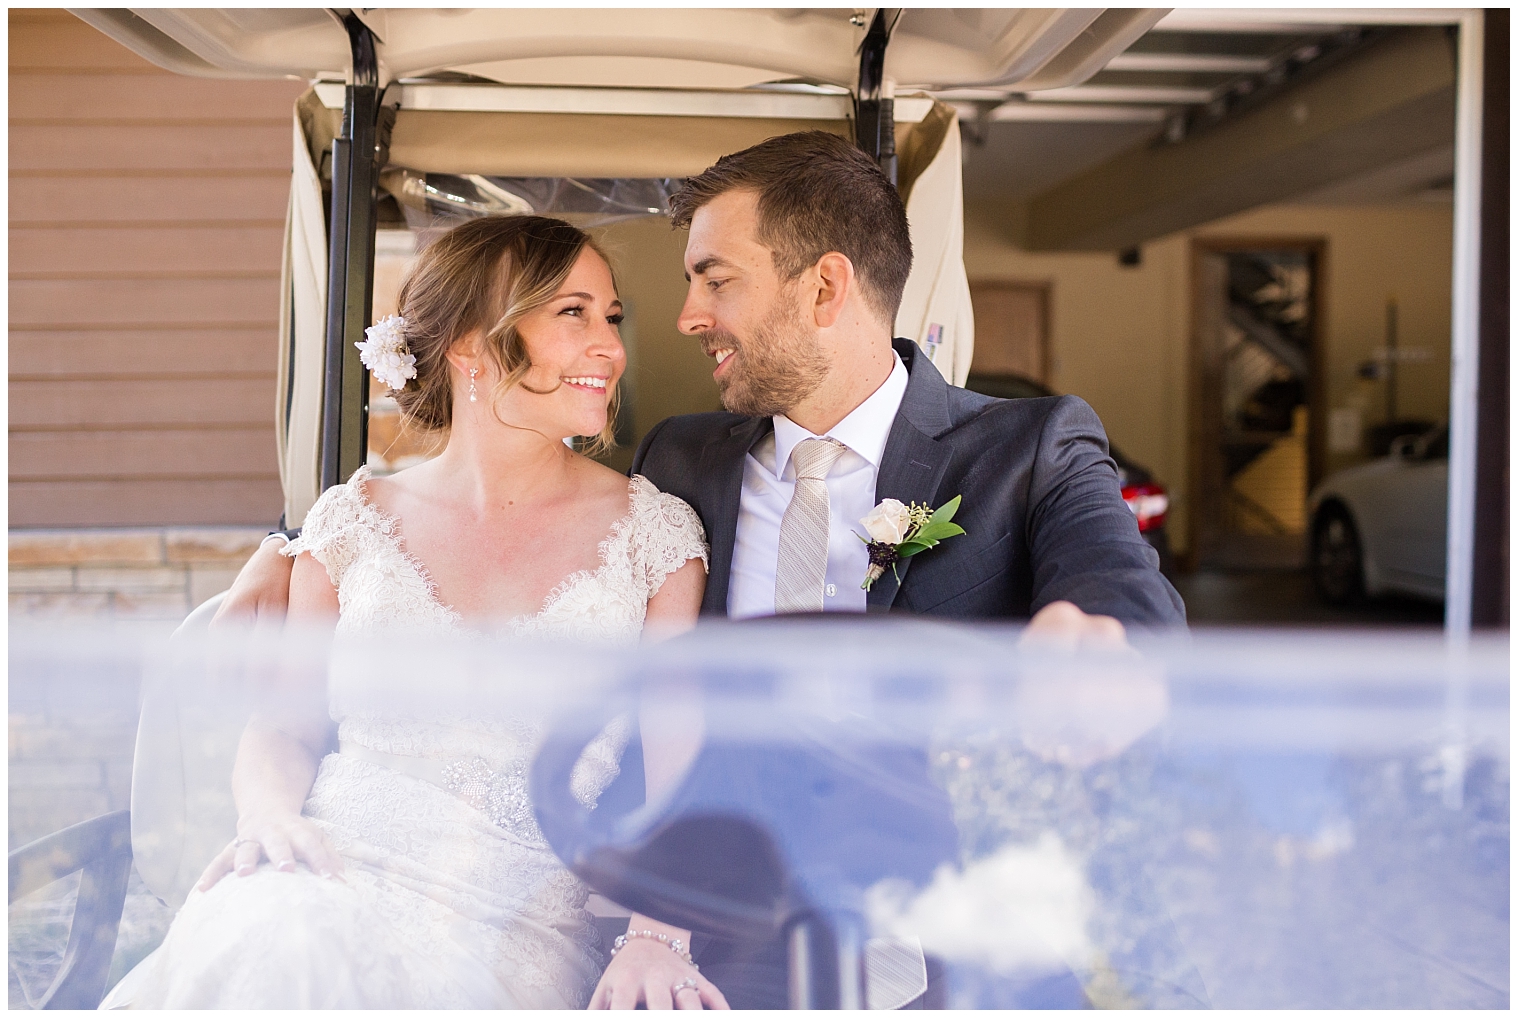 On their Copper Mountain wedding day, the bride and groom ride in a golf cart together.